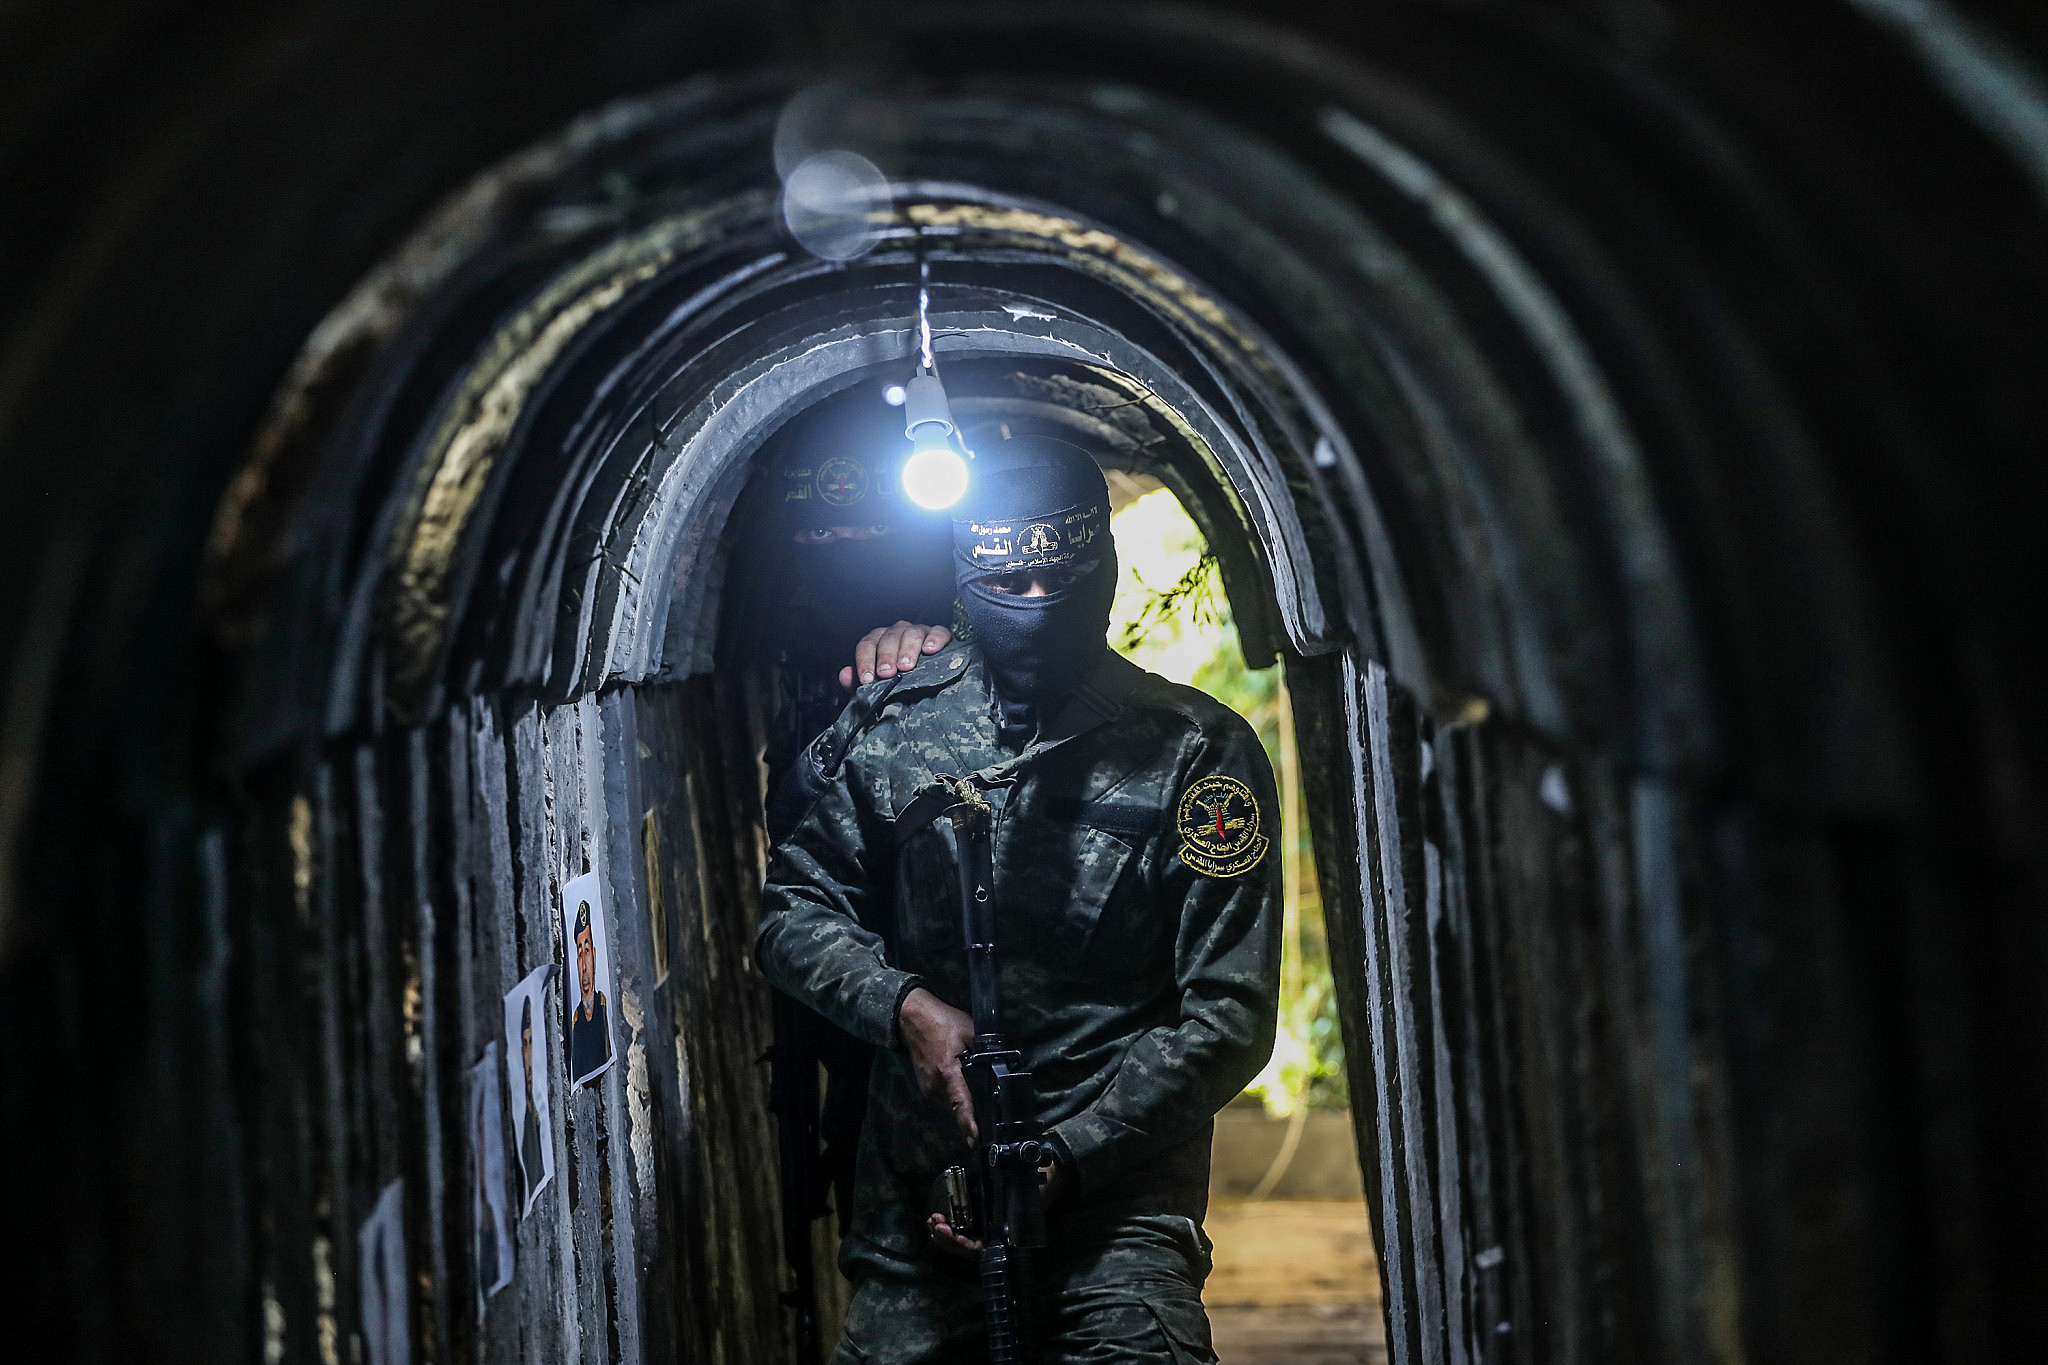 A Palestinian fighter of the Al-Quds Brigades, the military wing of Palestinian Islamic Jihad (PIJ), seen inside a military tunnel in Beit Hanoun, in the Gaza Strip, May 18, 2022. (Attia Muhammed/Flash90)